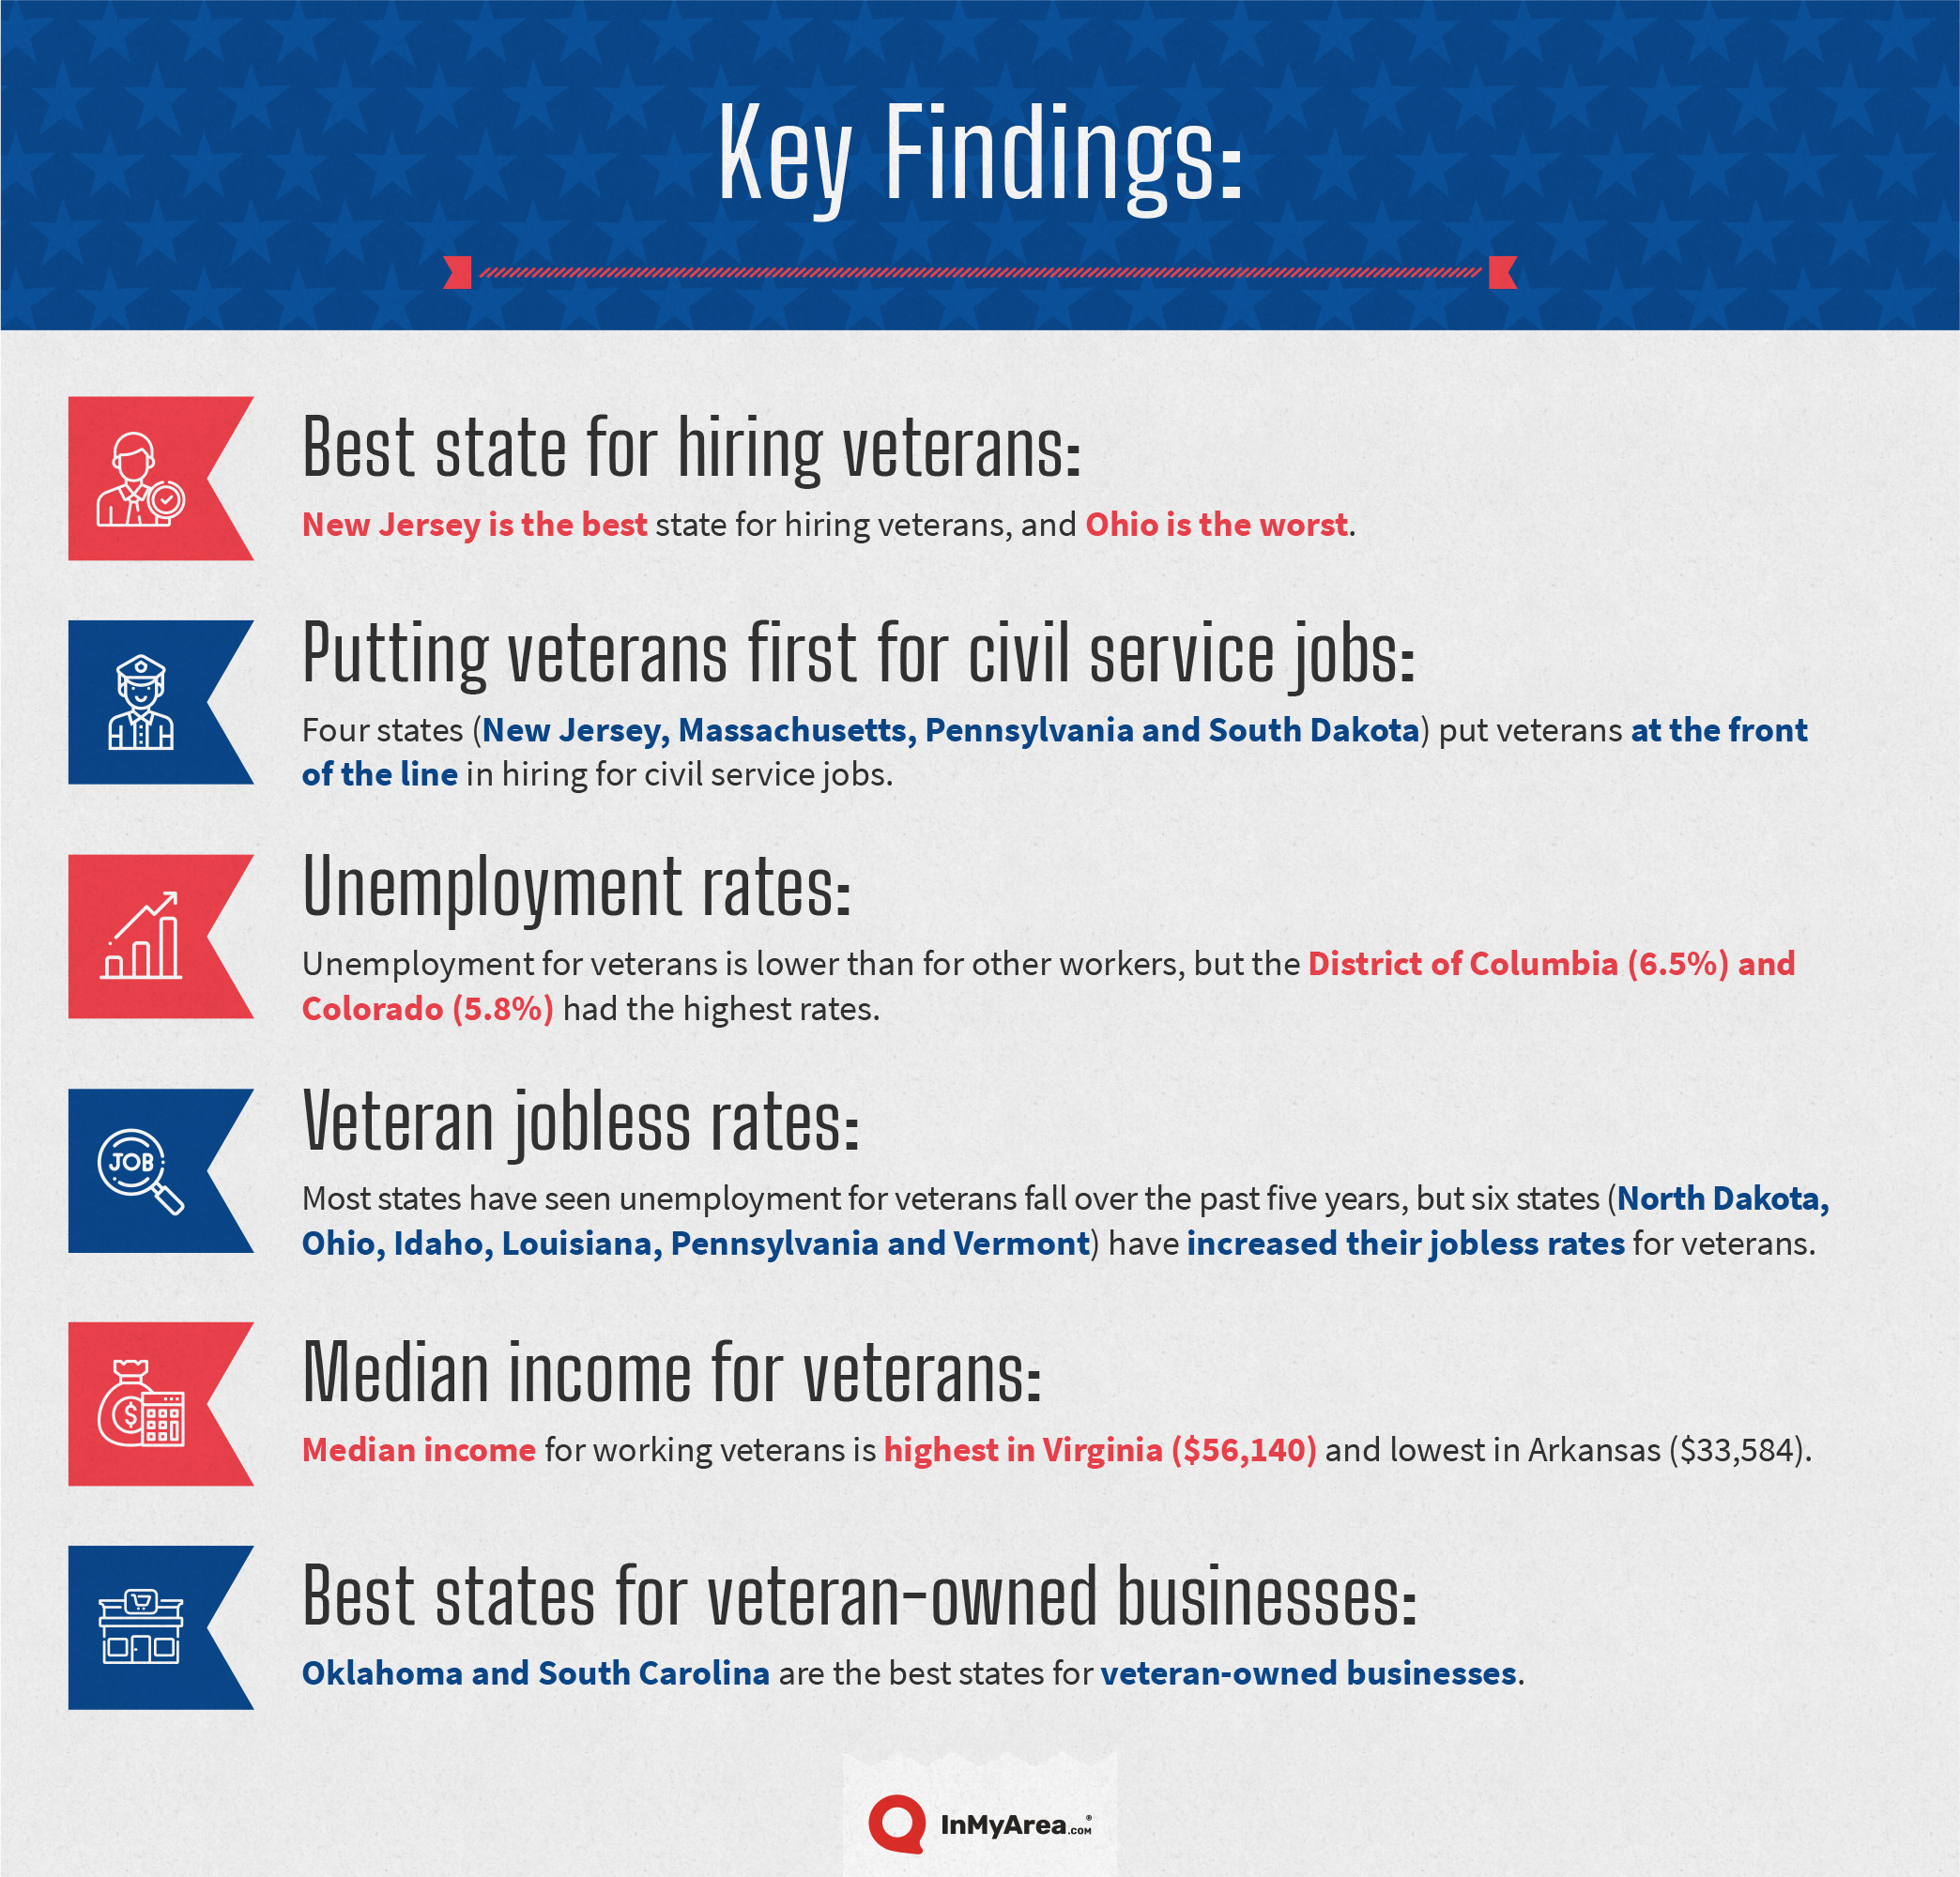 infographic showing key findings about veterans finding jobs